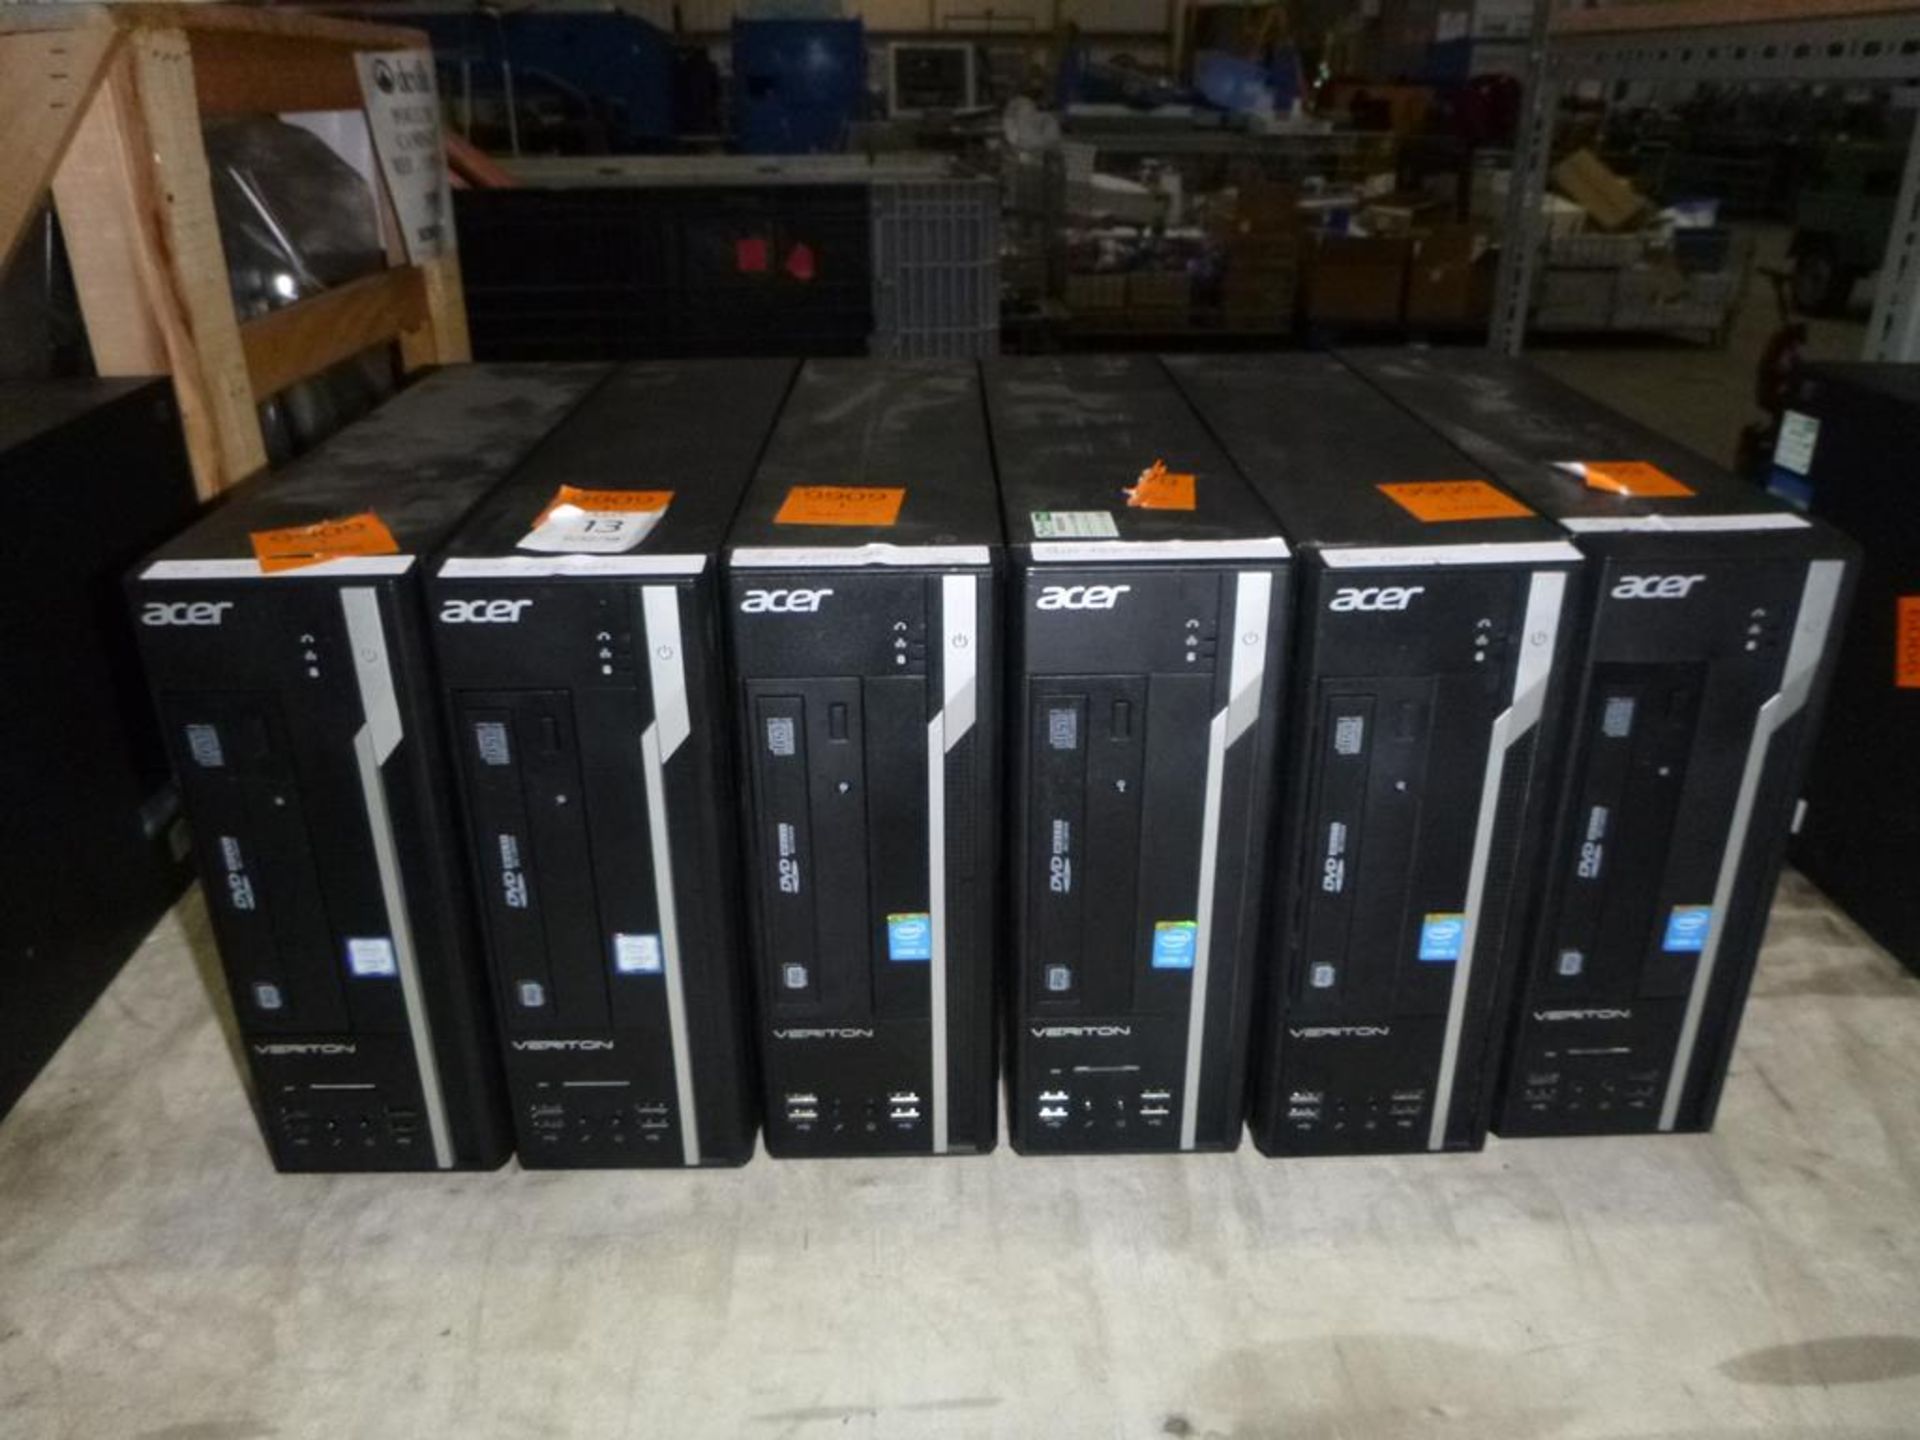 * 2 X Acer Veriton X2640G Towers and 4 X Acer Veriton X2632G Towers. Hard drives have been removed